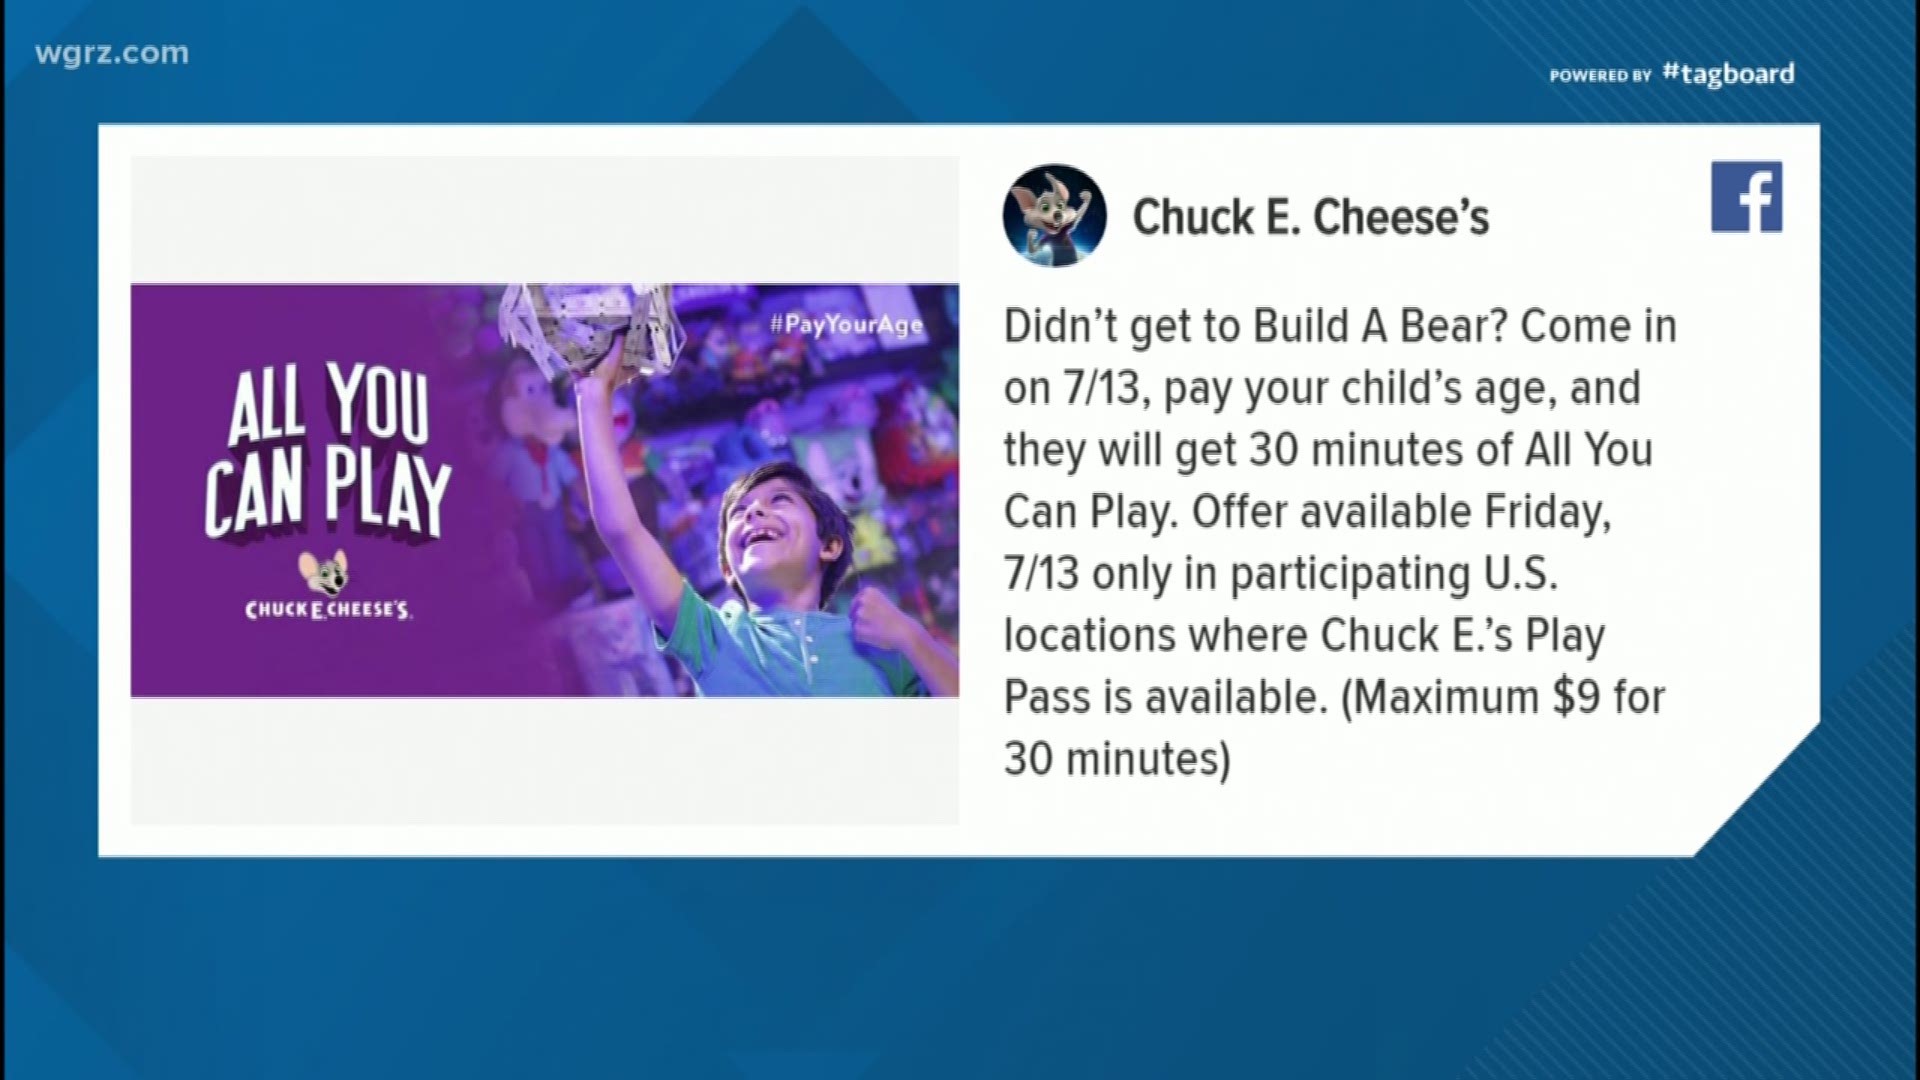 Chuck E. Cheese's Offers "Pay Your Age"